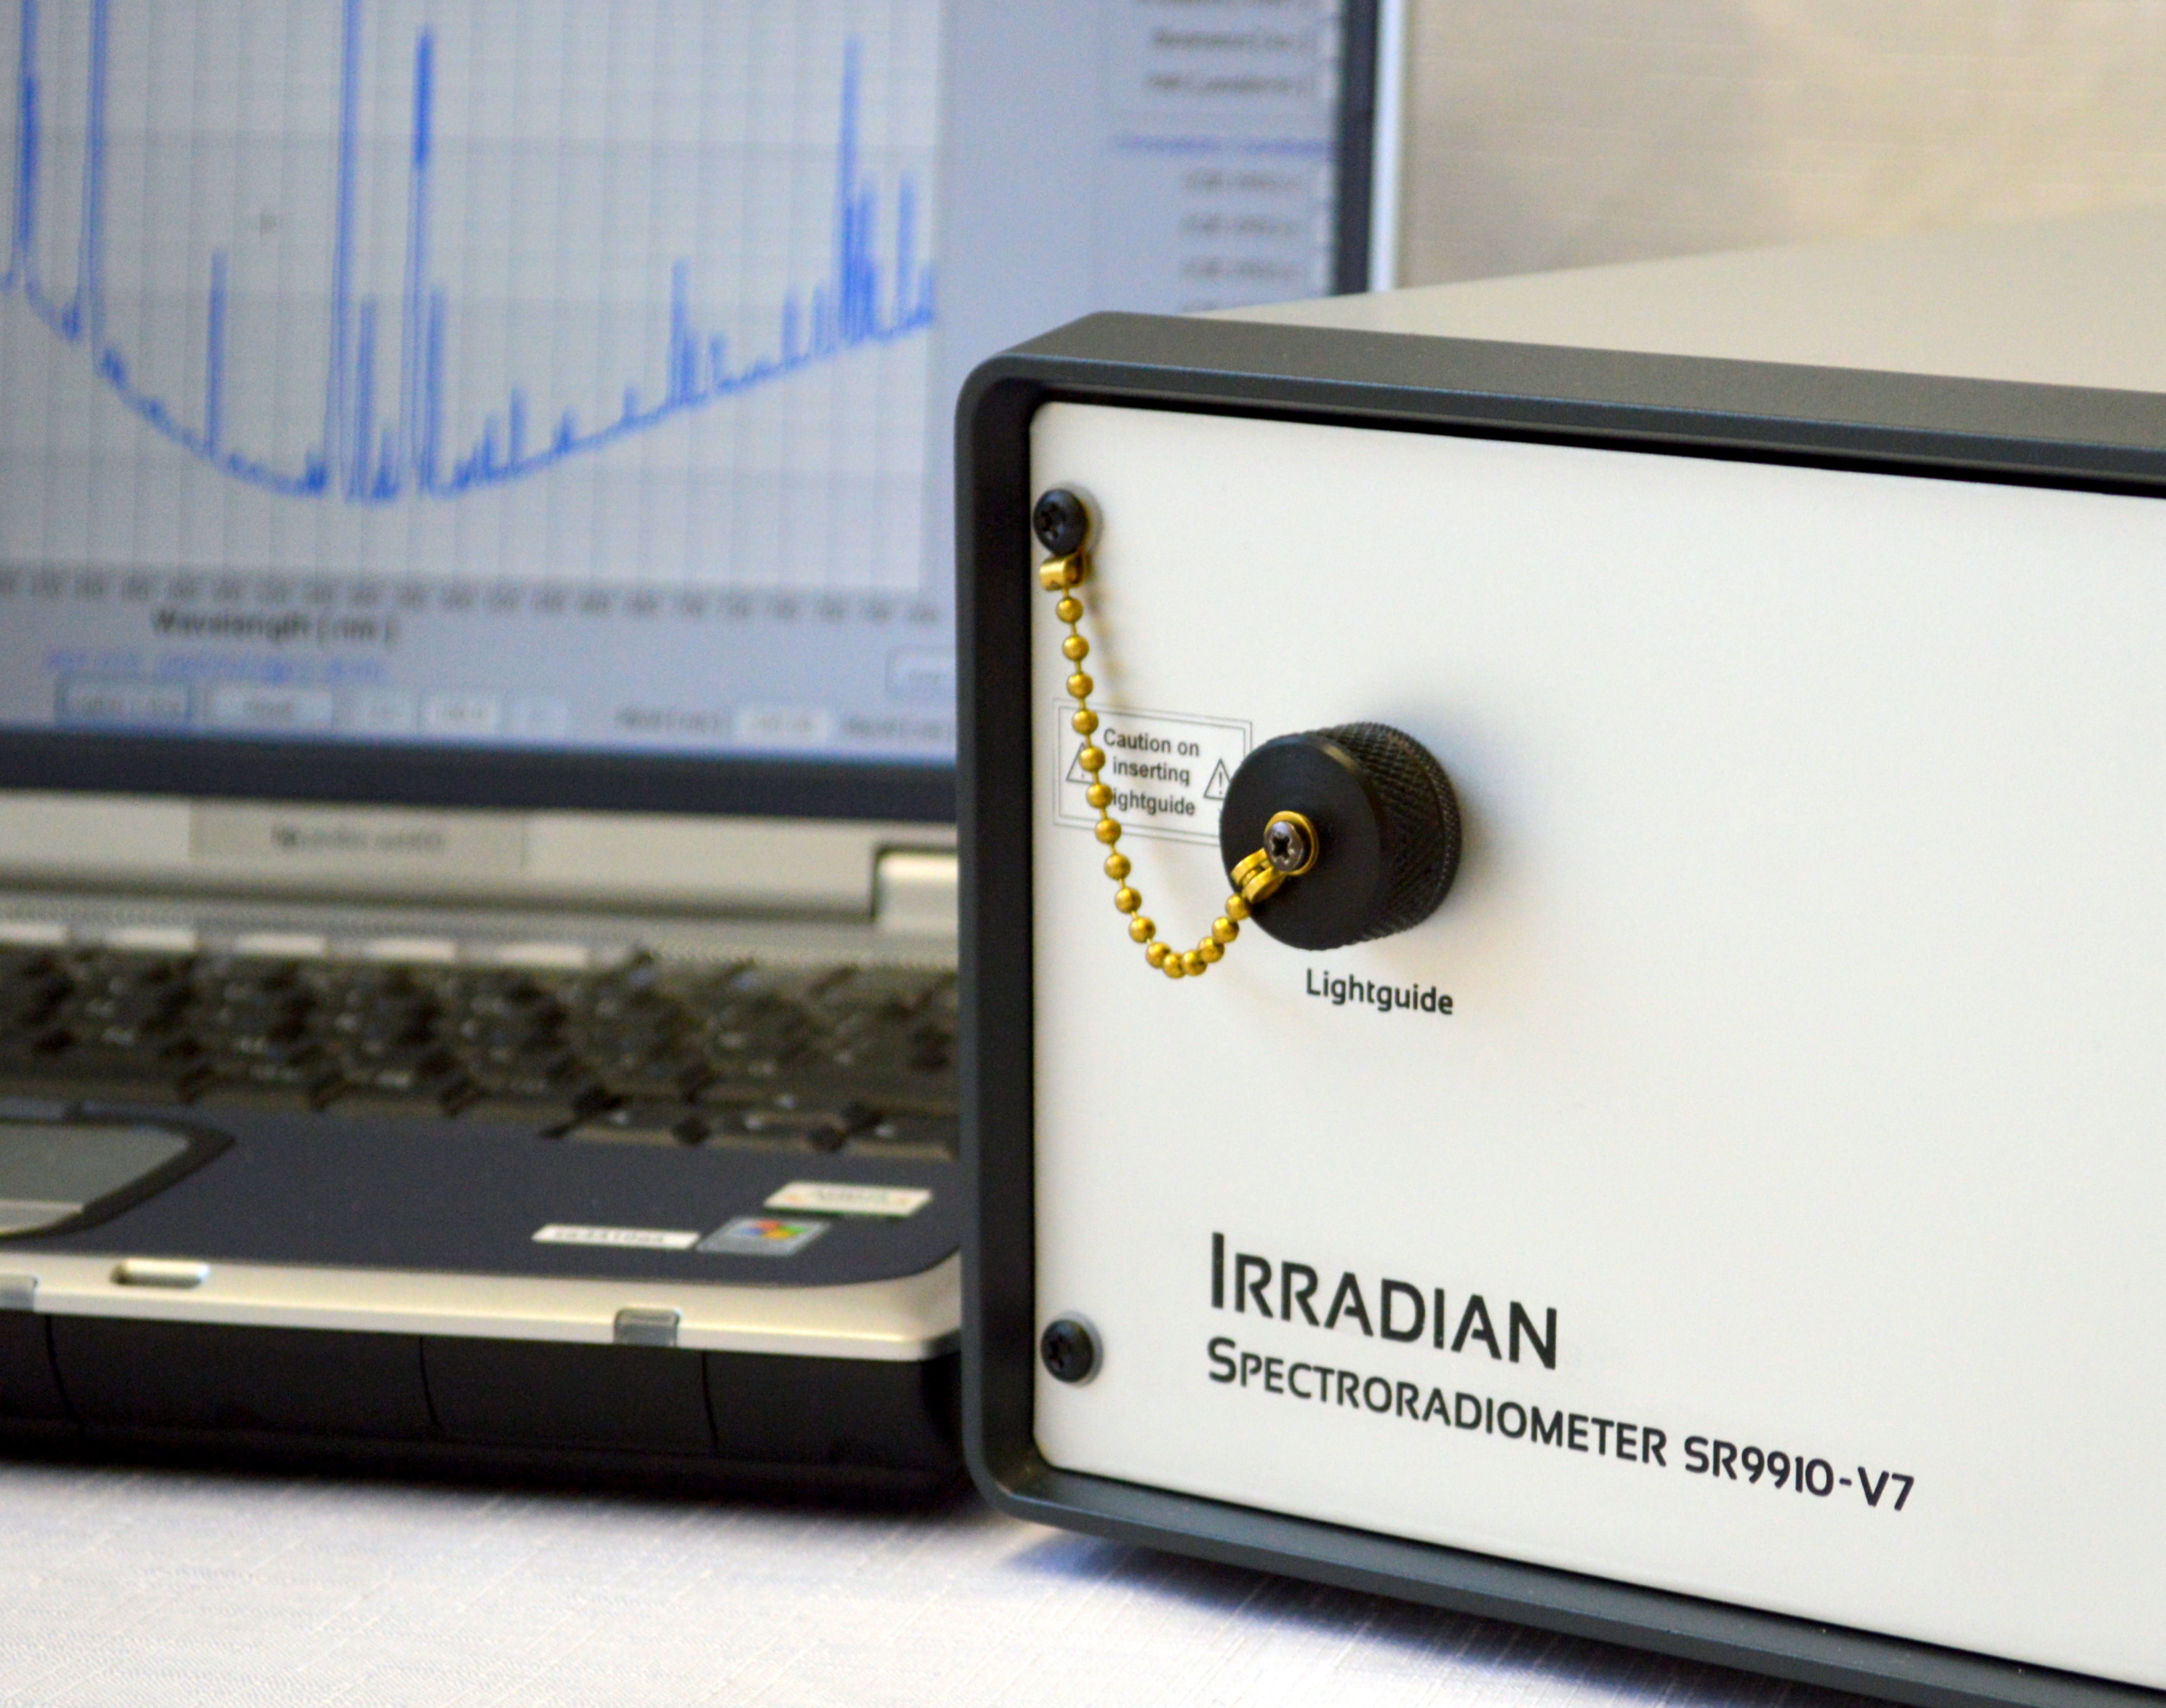 The Irradian spectroradiometer has a new brochure available